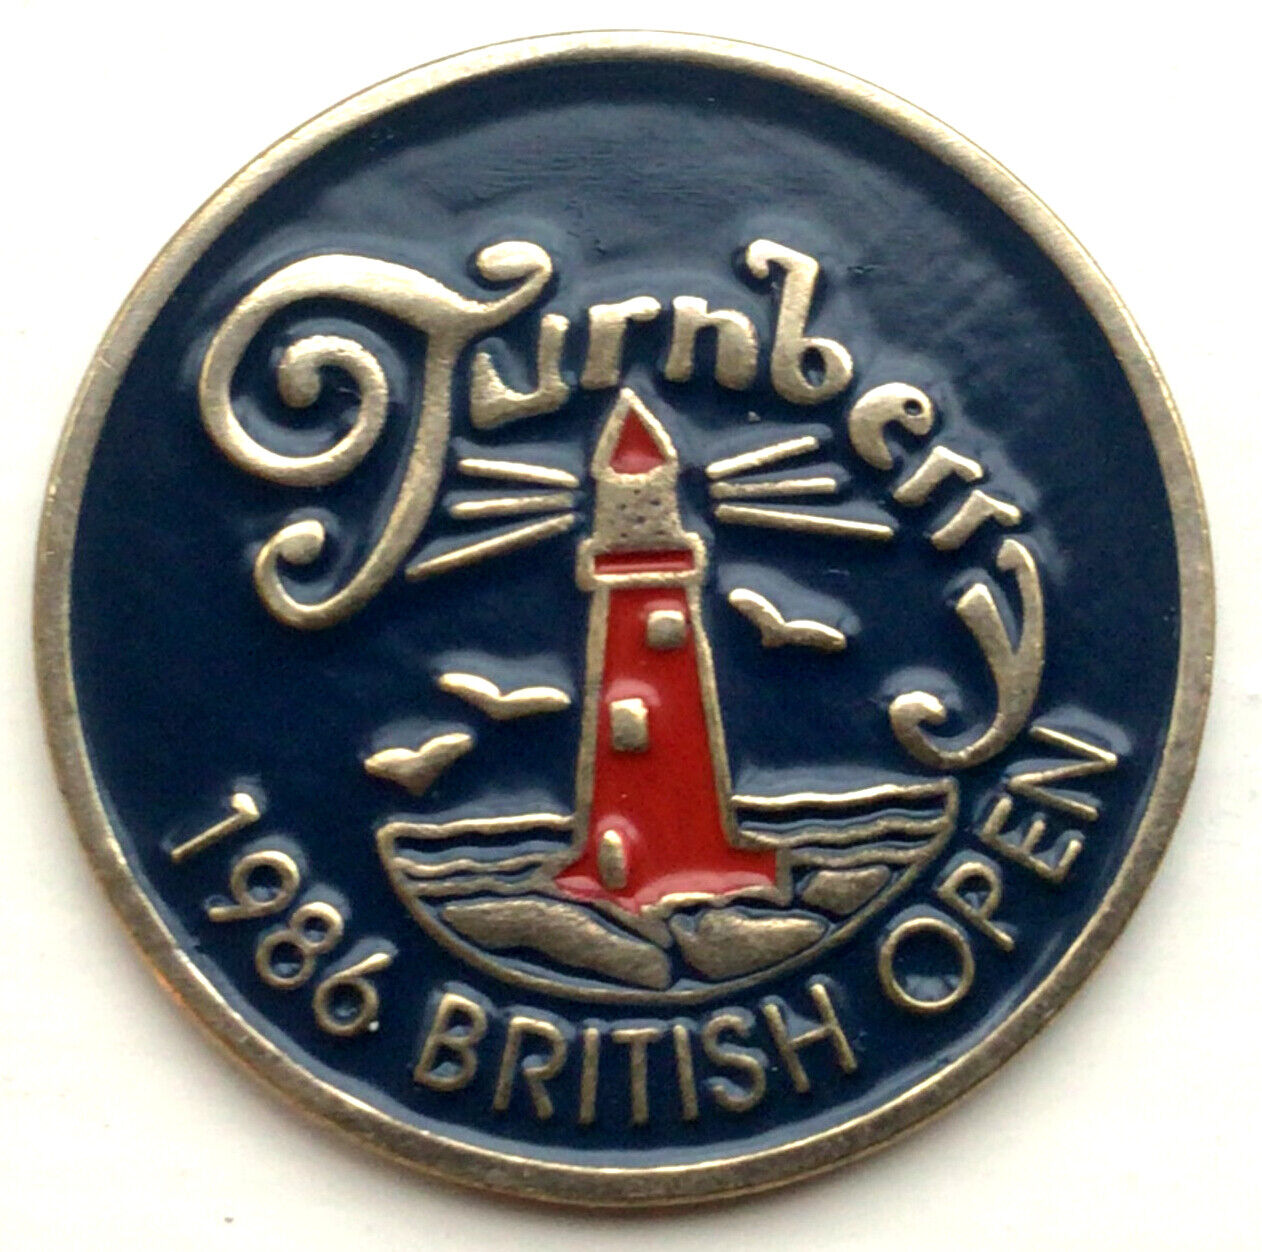 1986 OPEN 1" HAND PAINTED COIN BALL MARKER TURNBERRY - 35th BIRTHDAY GIFT